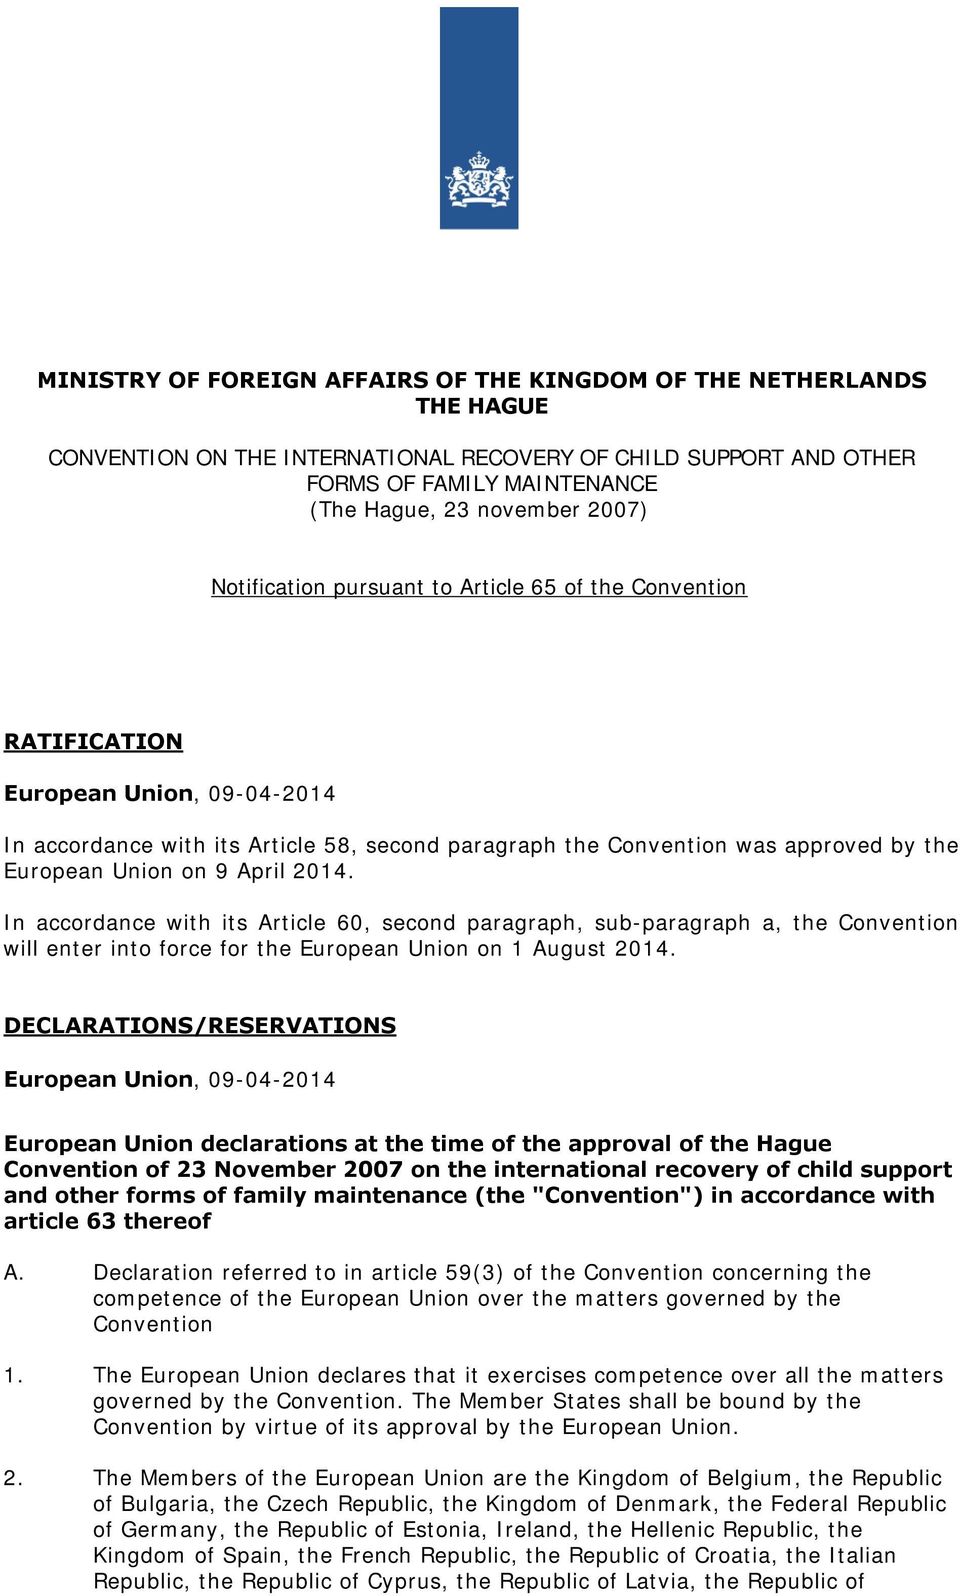 9 April 2014. In accordance with its Article 60, second paragraph, sub-paragraph a, the Convention will enter into force for the European Union on 1 August 2014.